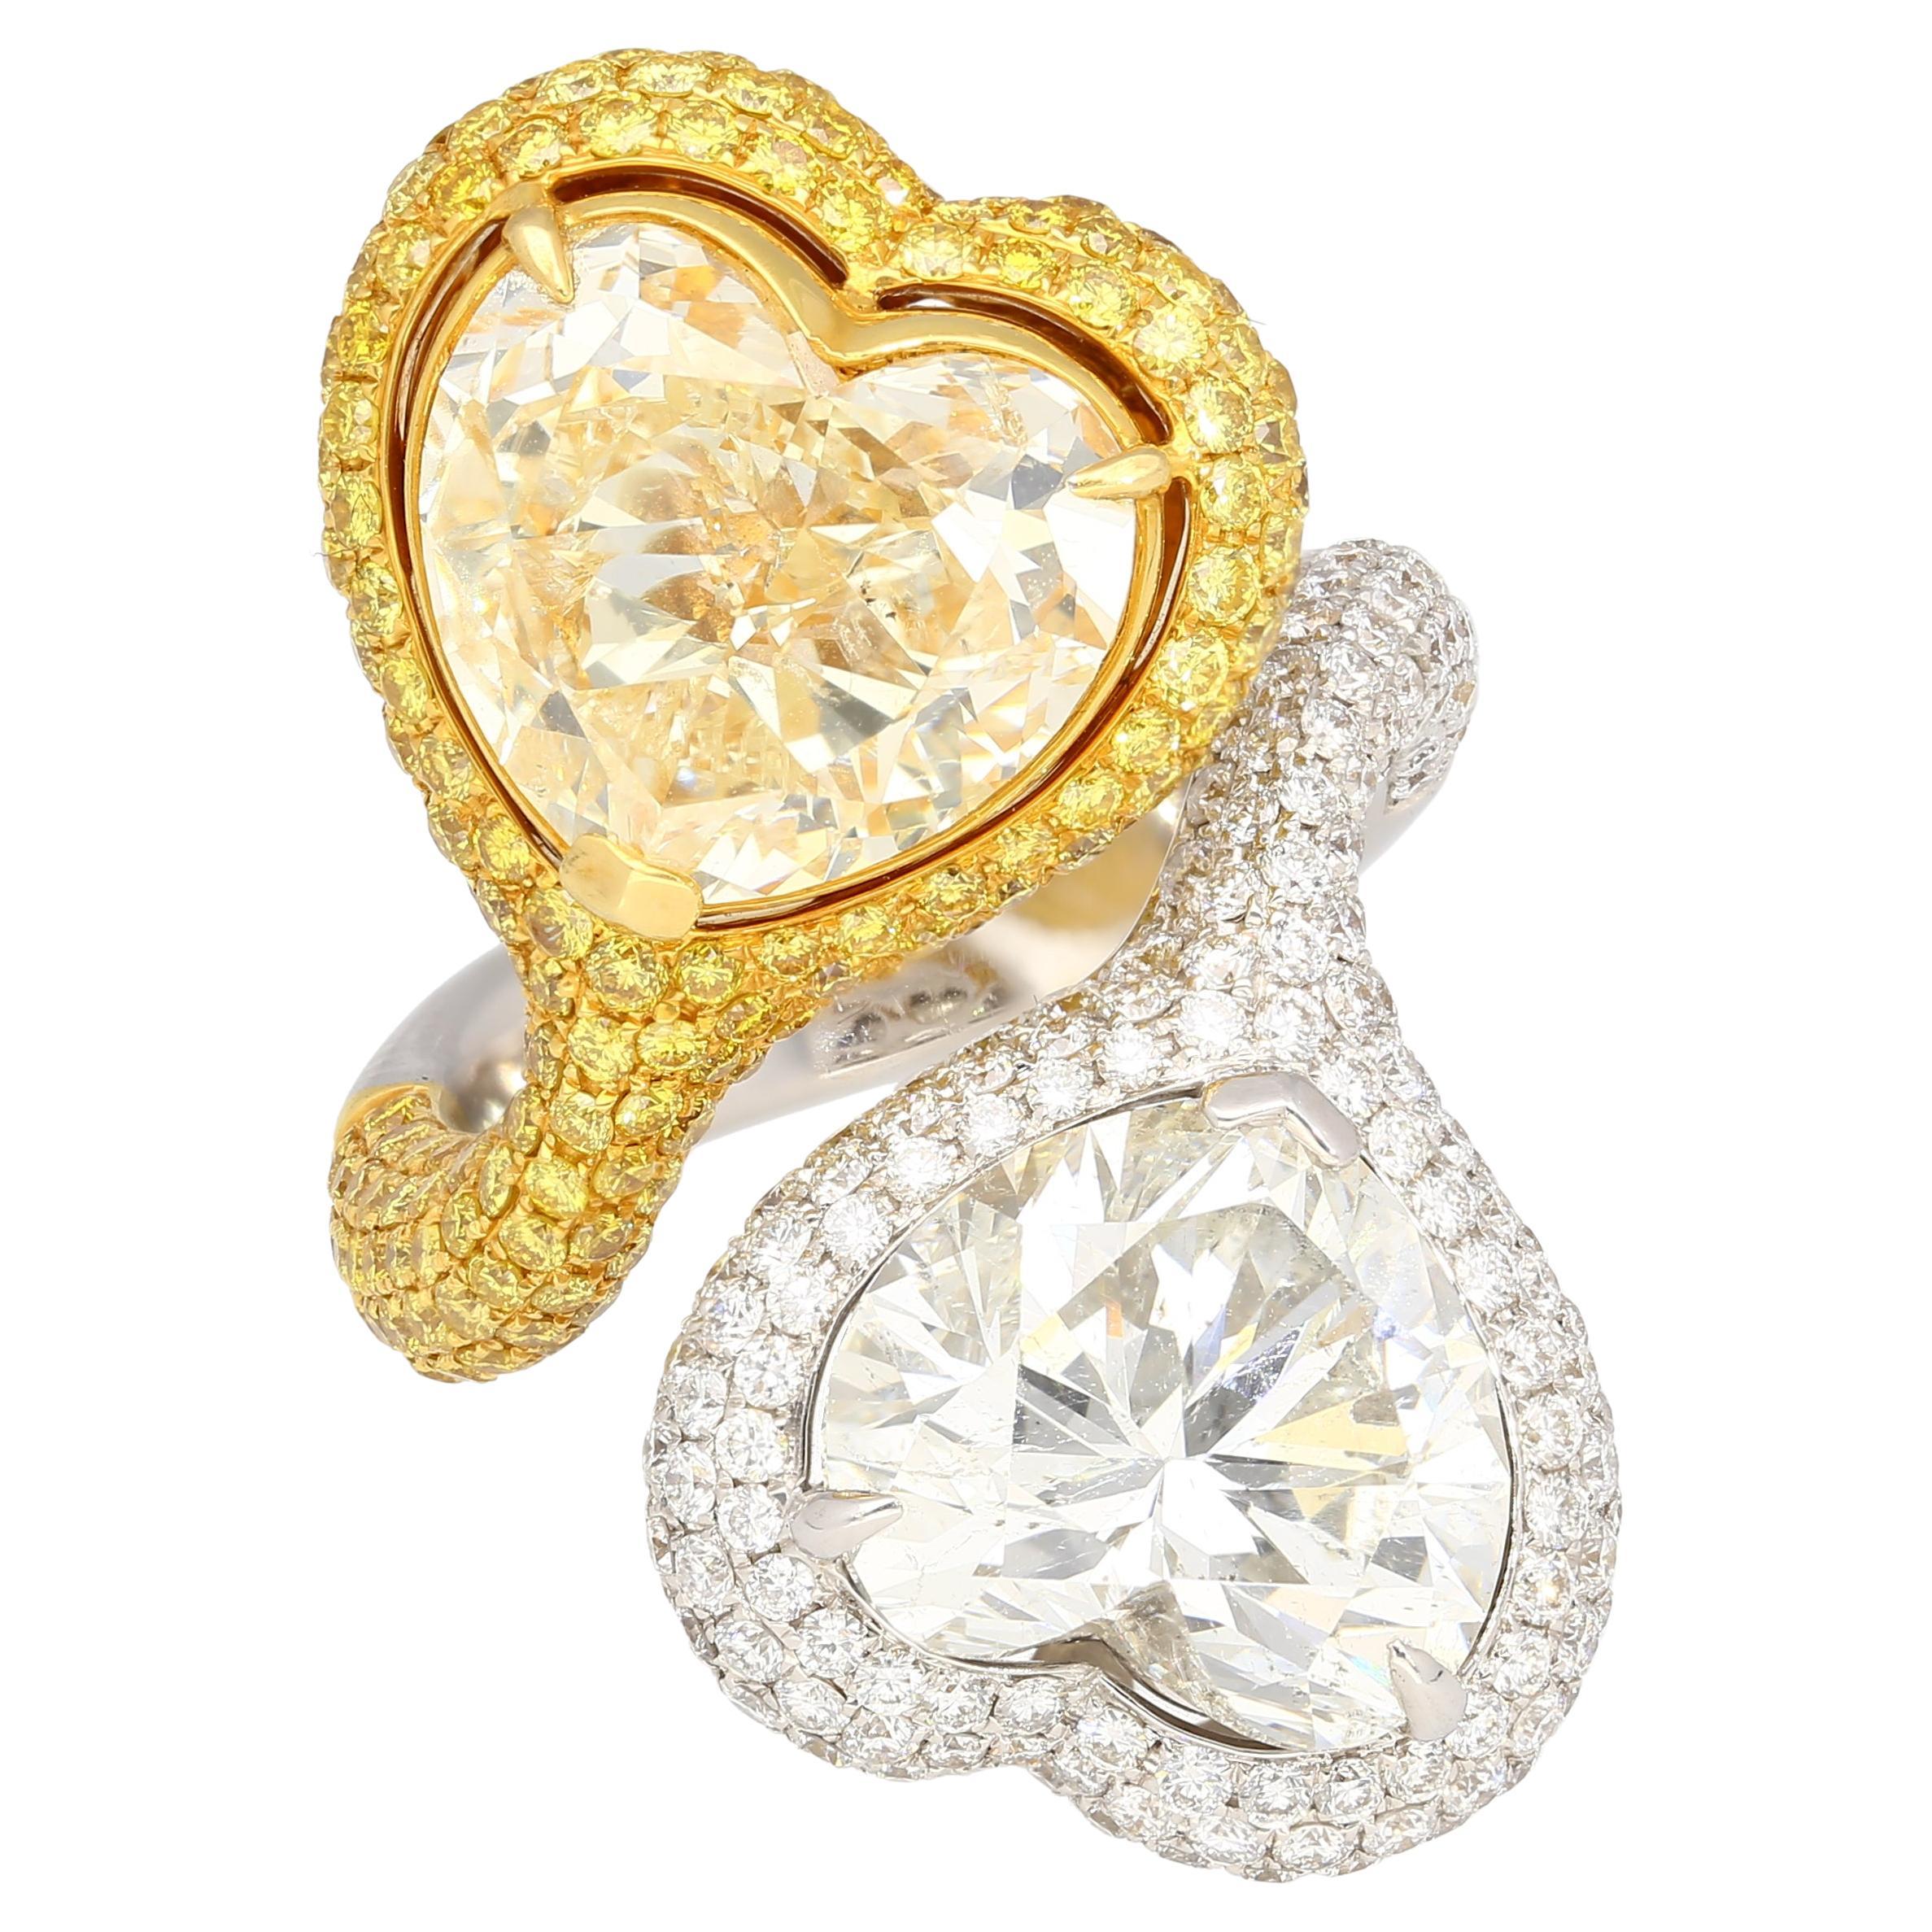 18K two-tone Toi Et Moi ring, weighing 16.57 grams. Featuring two heart-cut diamonds; 5.79ct G/SI2 with EGL #EGL6302103318, and 5.73ct Fancy Yellow with SI2 clarity. Adorned by 192 Round-cut yellow diamonds of 1.57cttw and 191 Round-cut white